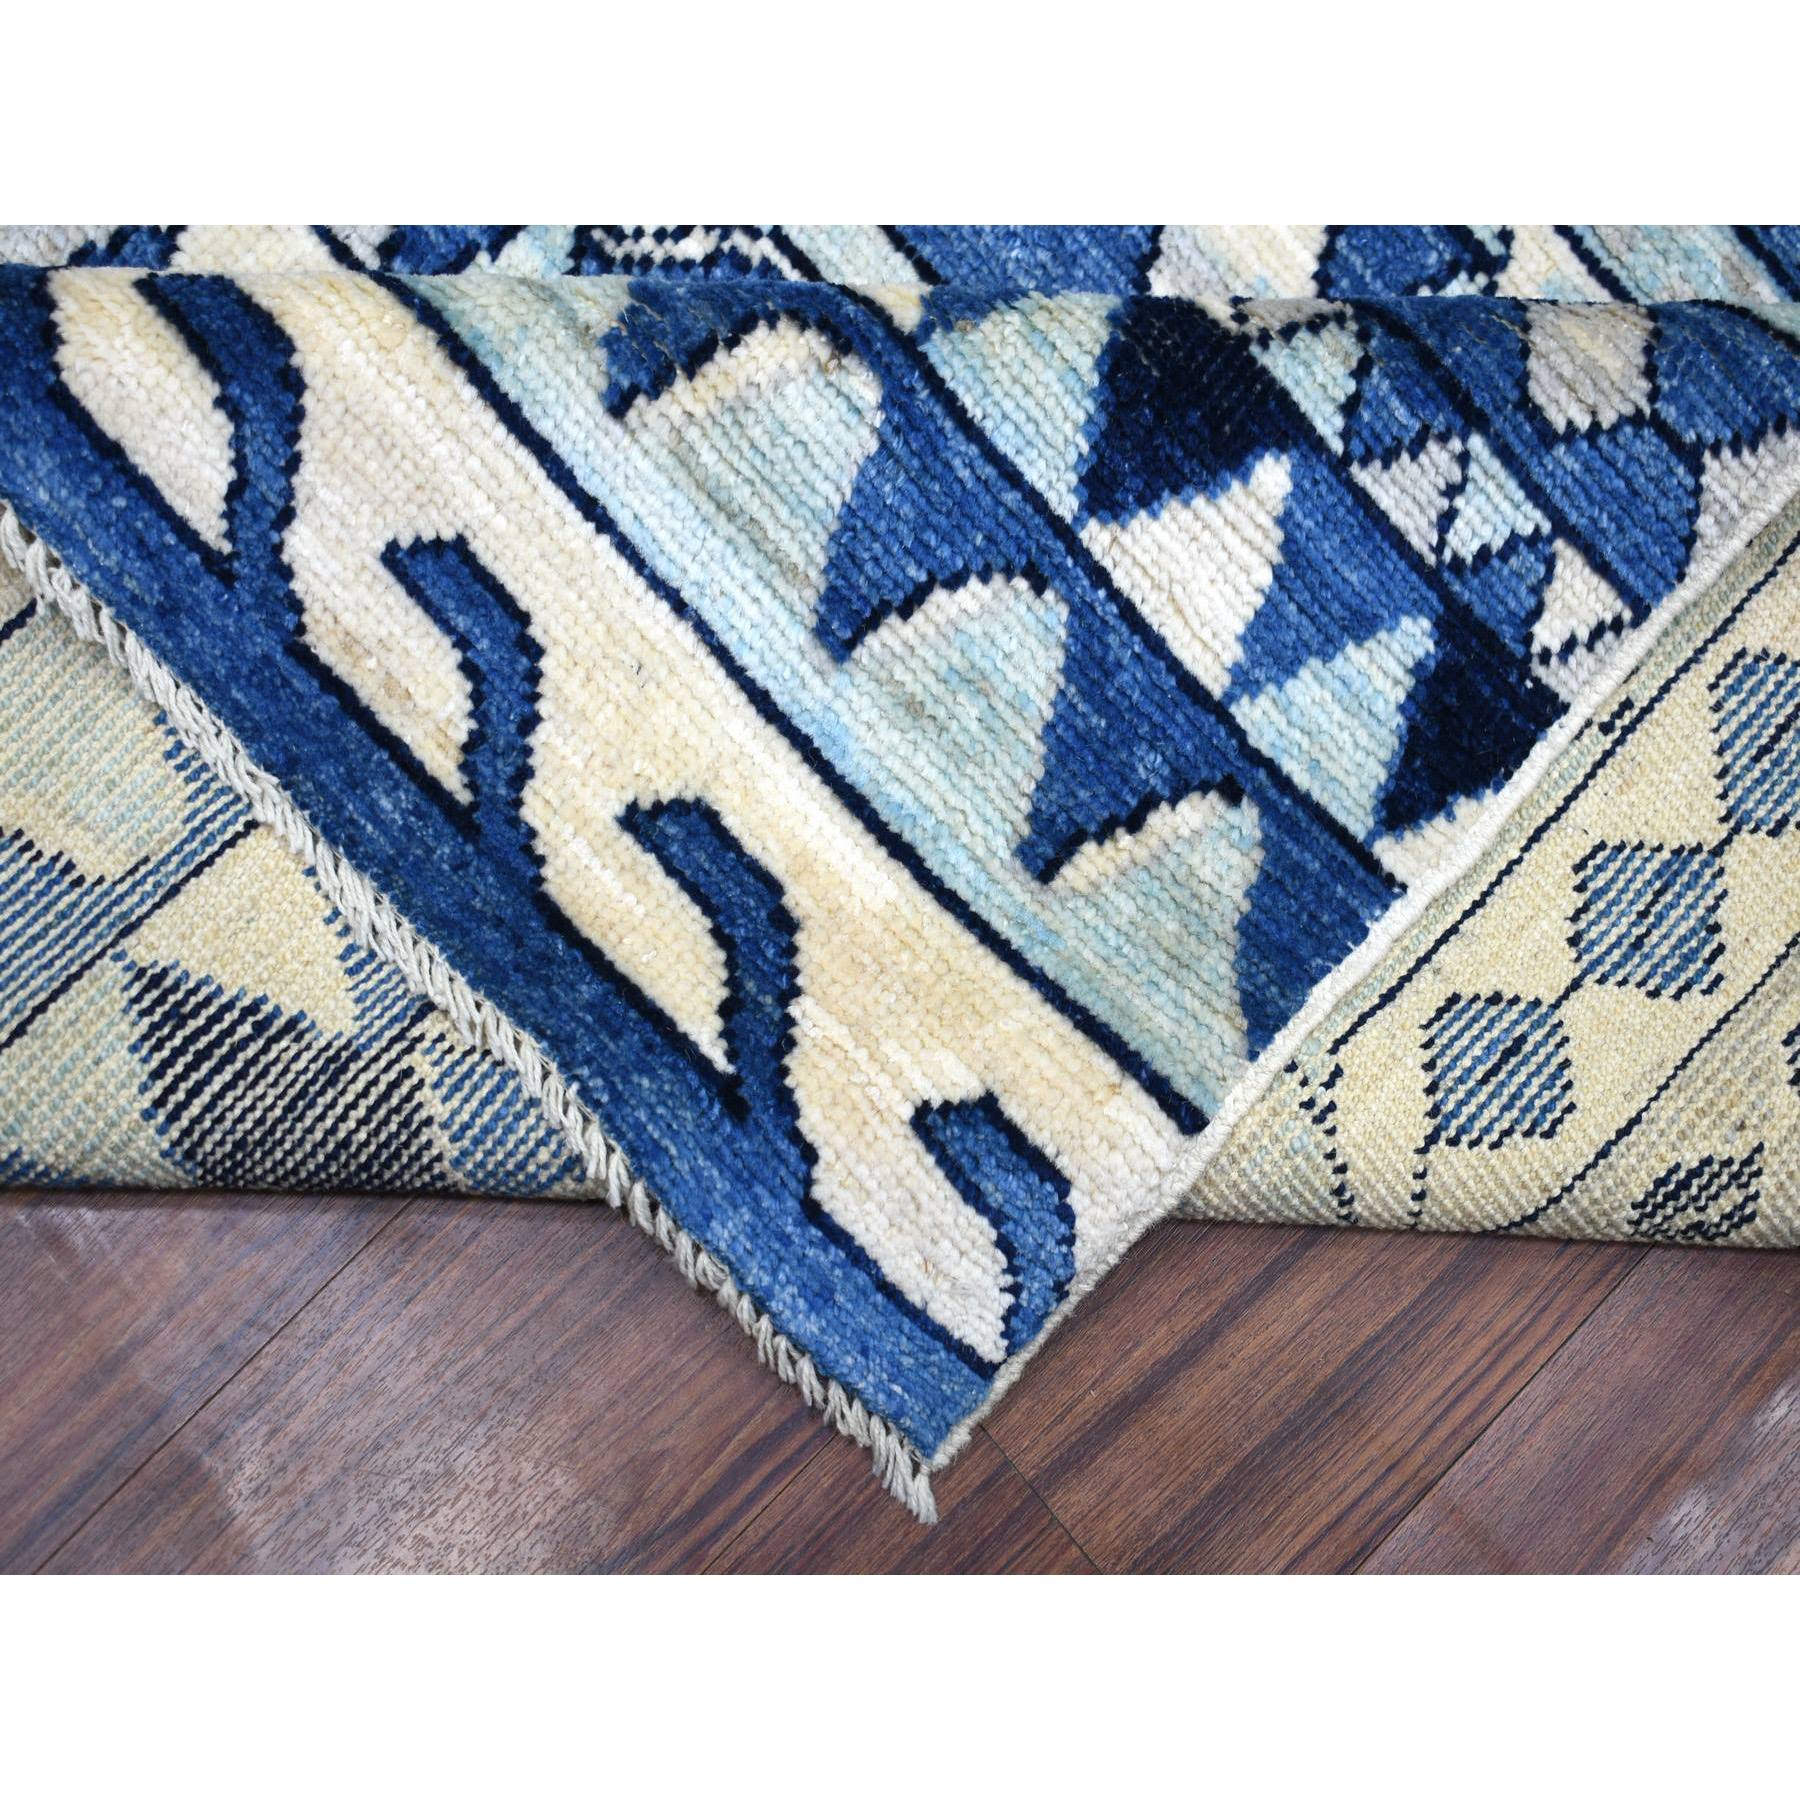 9'x12' Denim Blue, Anatolian Village Inspired Geometric Style Natural Dyes, Soft Wool Hand Woven, Oriental Rug 